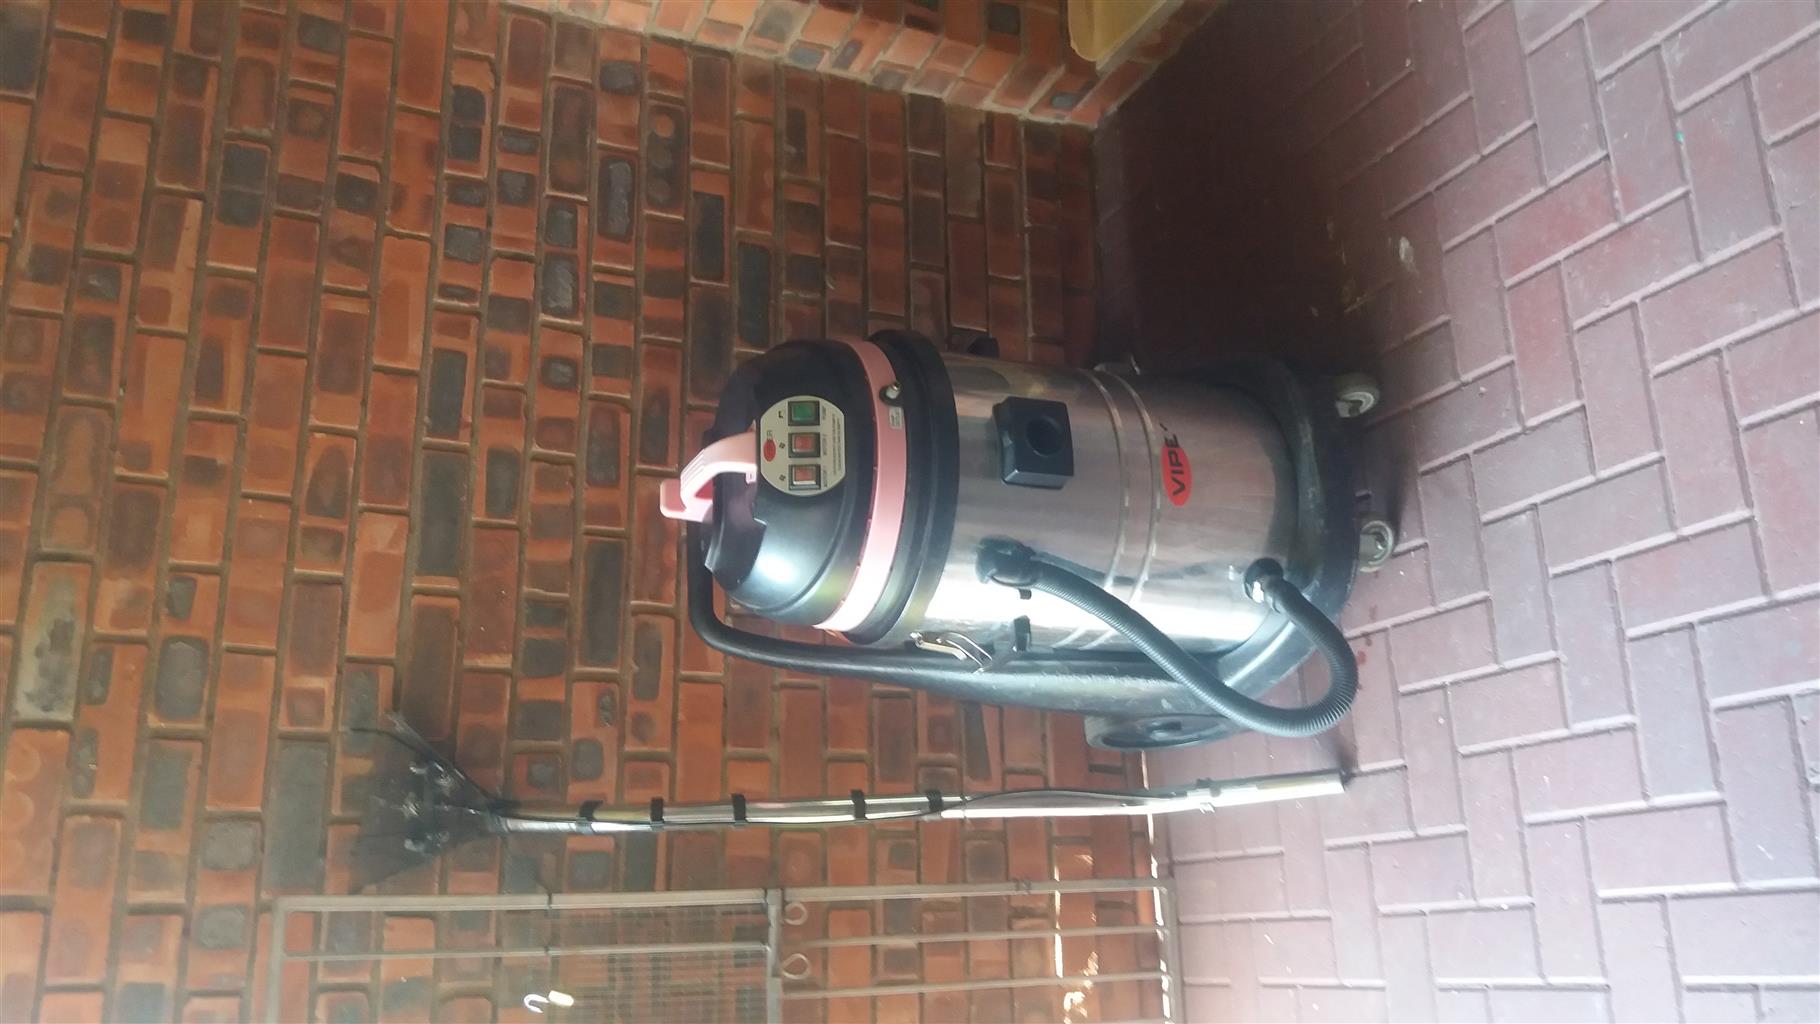 Viper  Industrial Carpet and Upholstery carpet cleaning machine